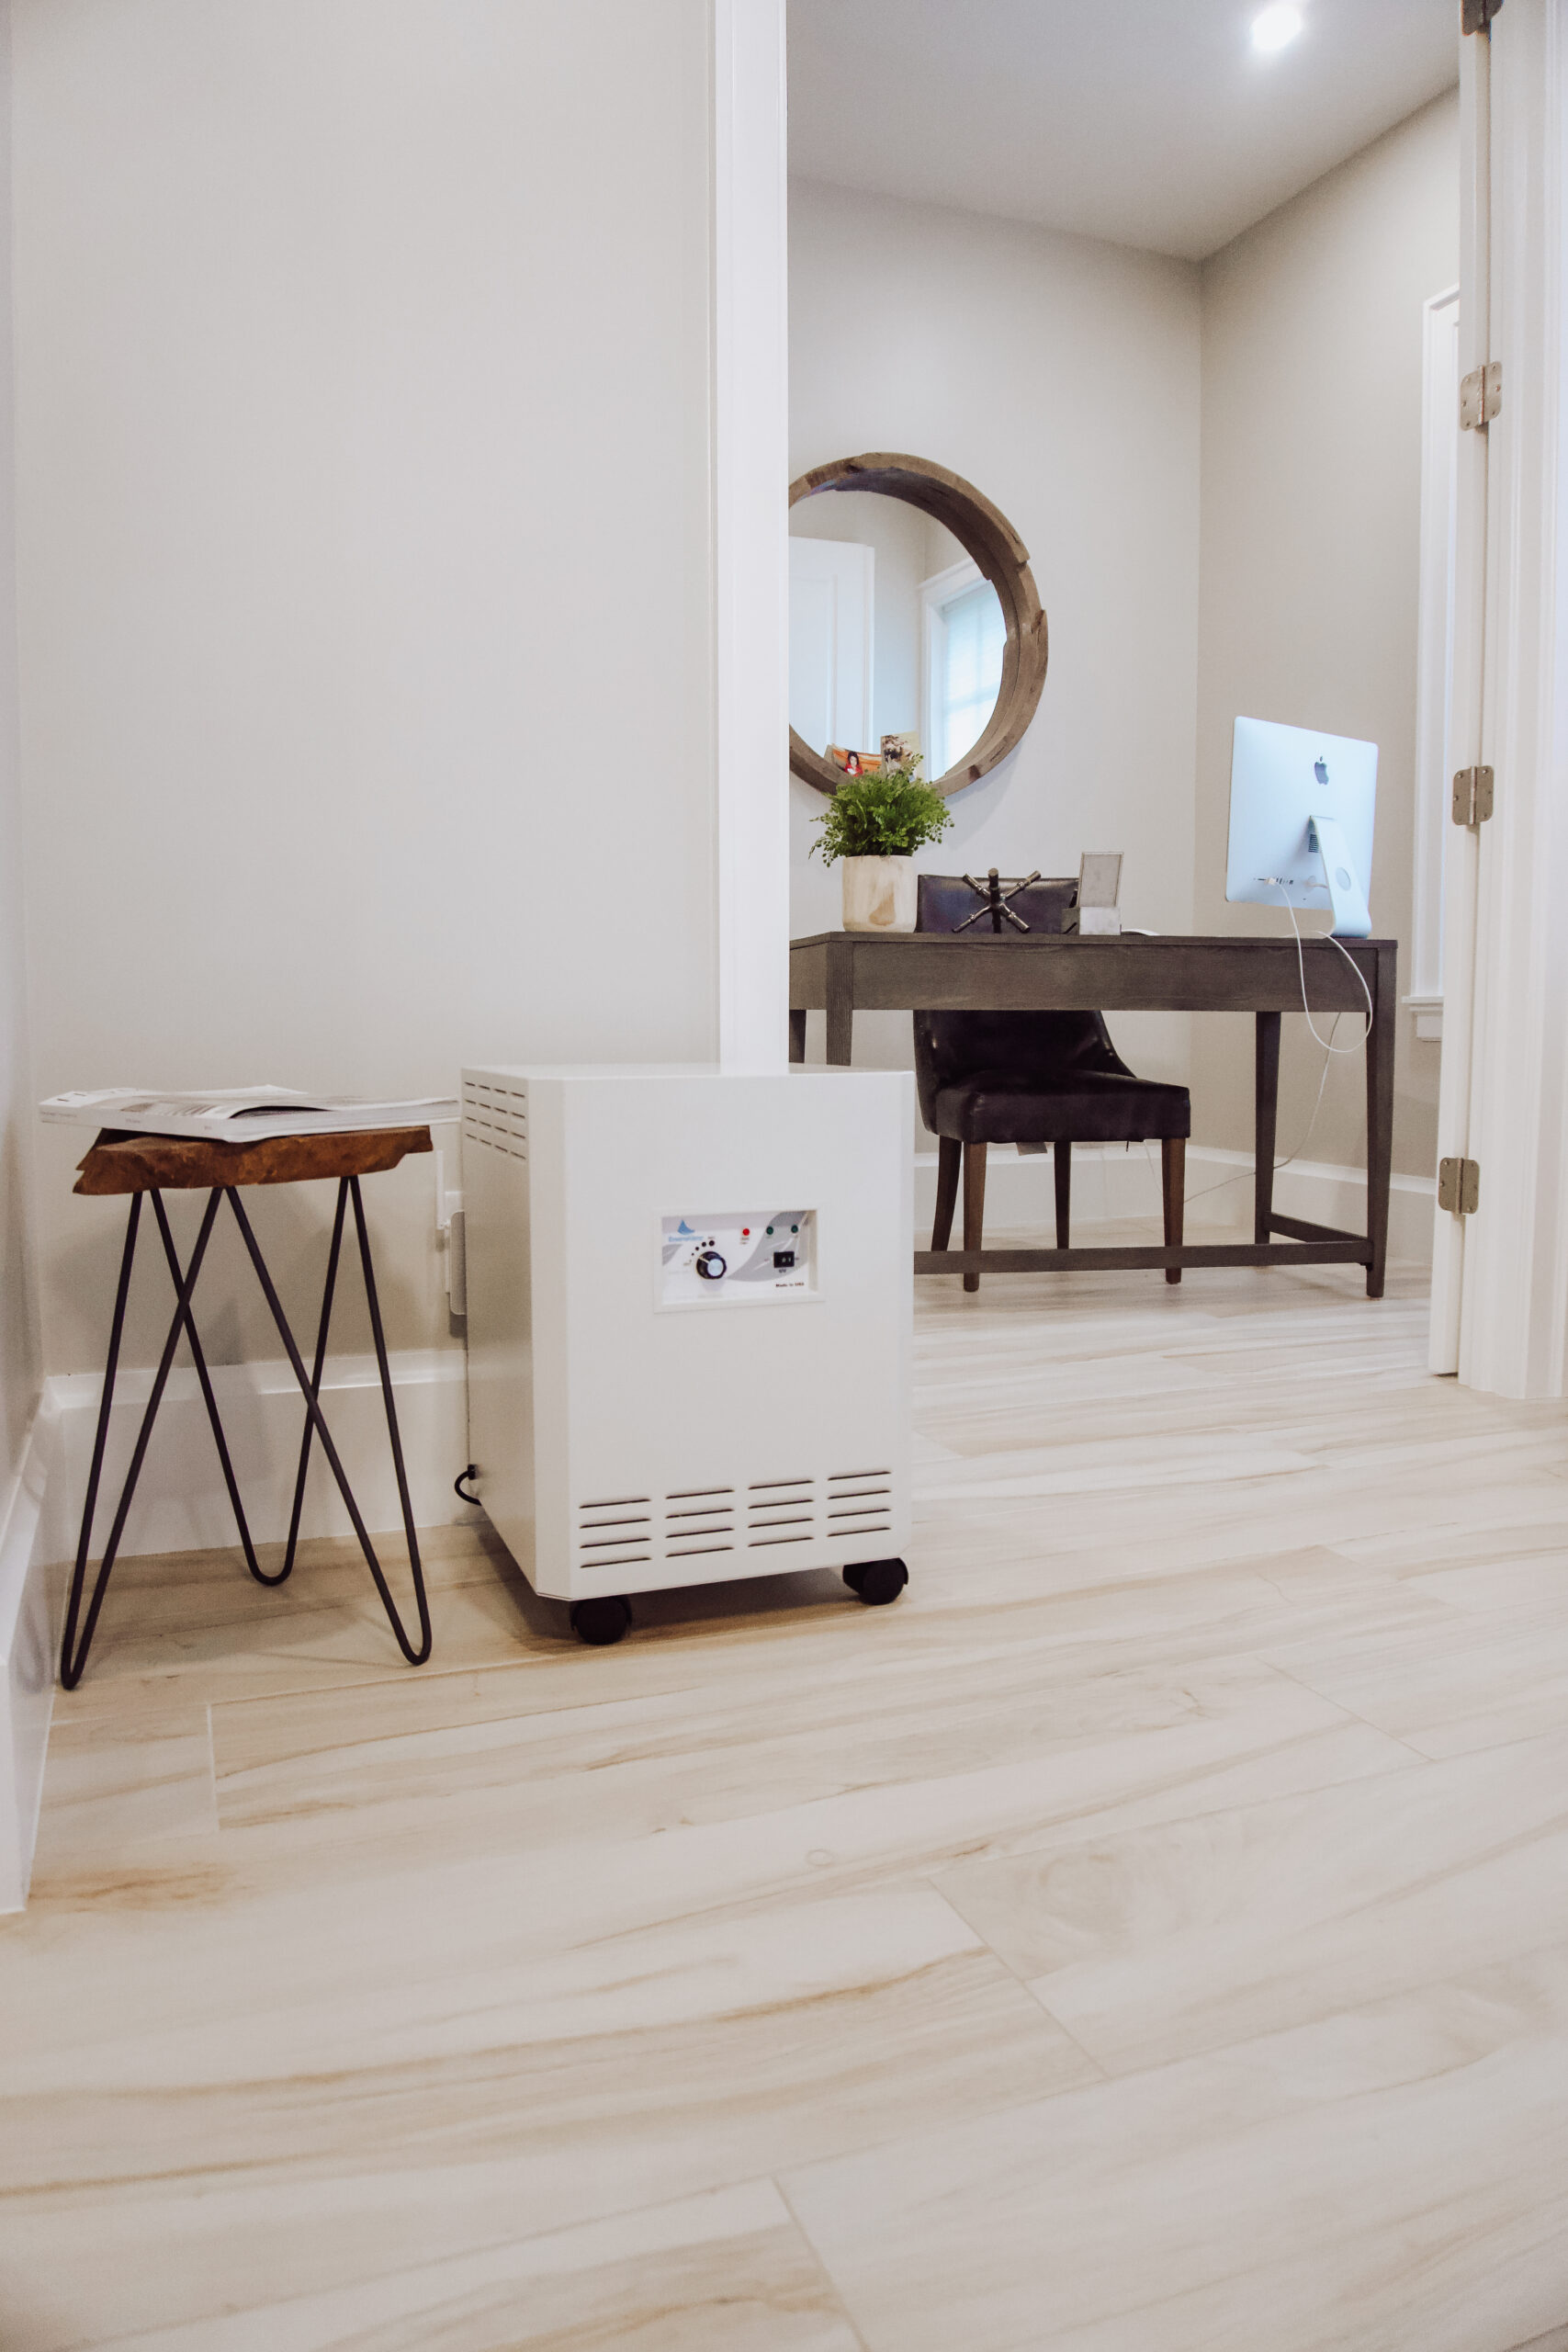 Give the Gift of Clean Air EnviroKlenz Air System